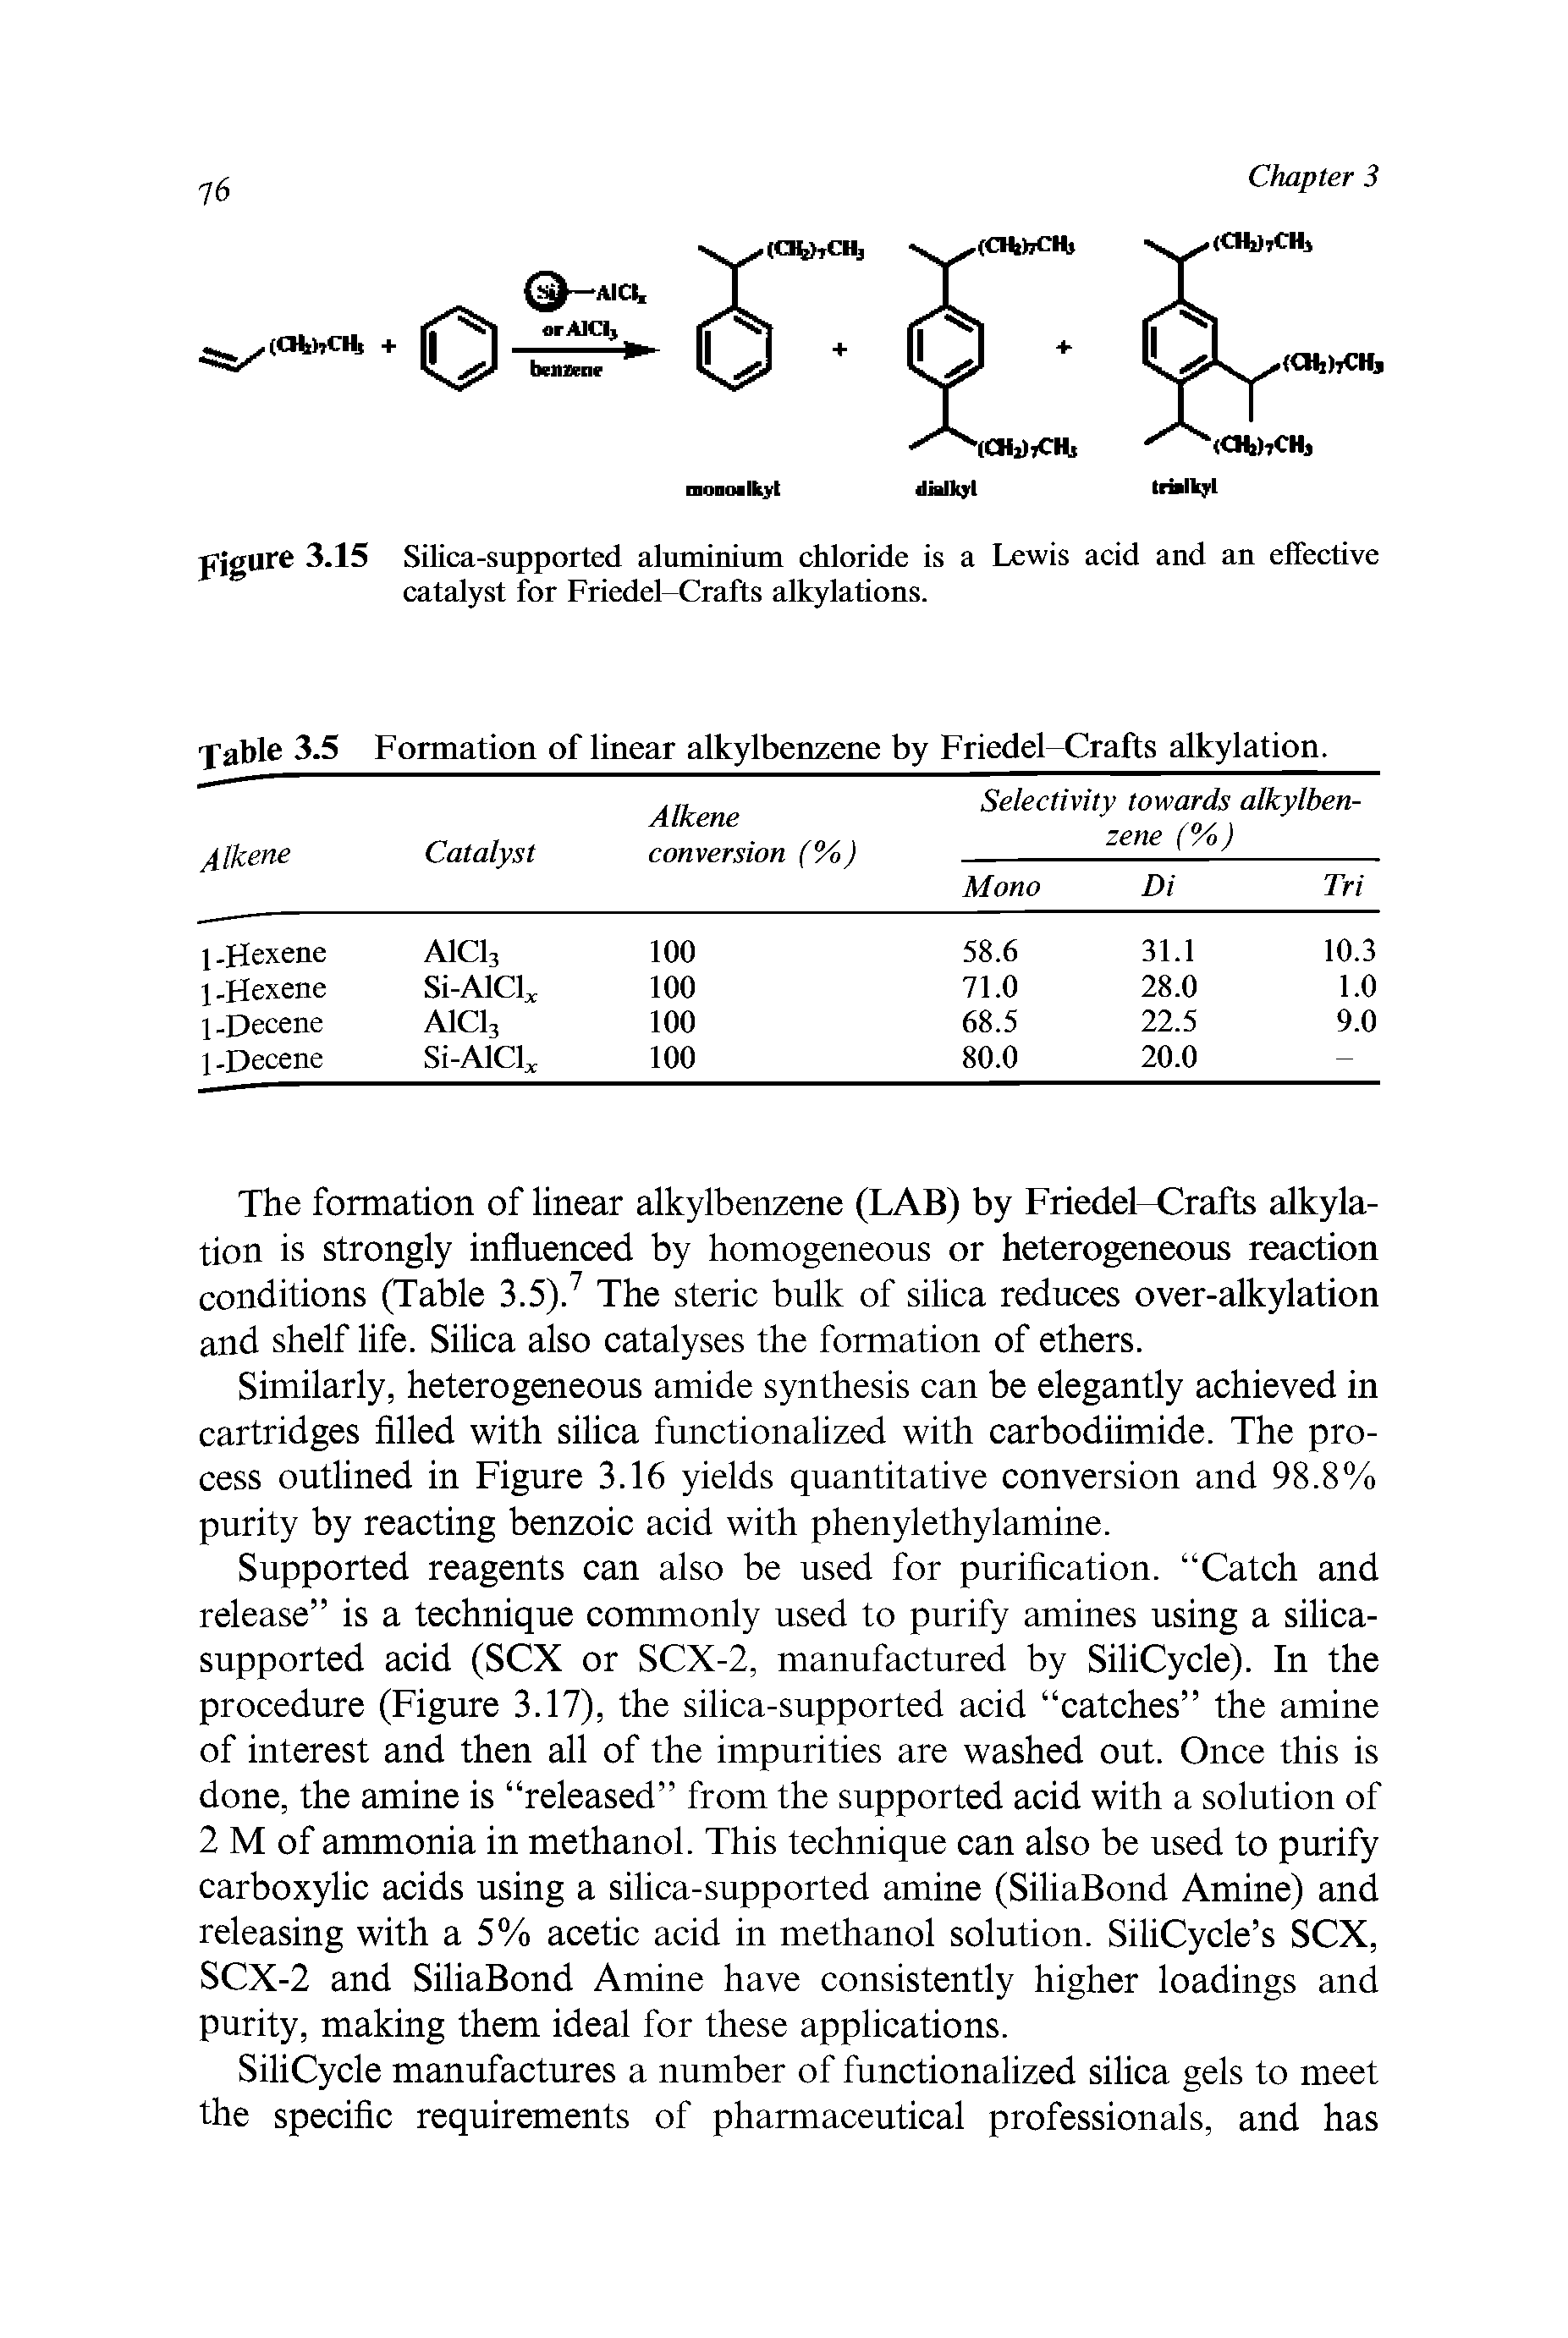 Table 3.5 Formation of linear alkylbenzene by Friedel Crafts alkylation.